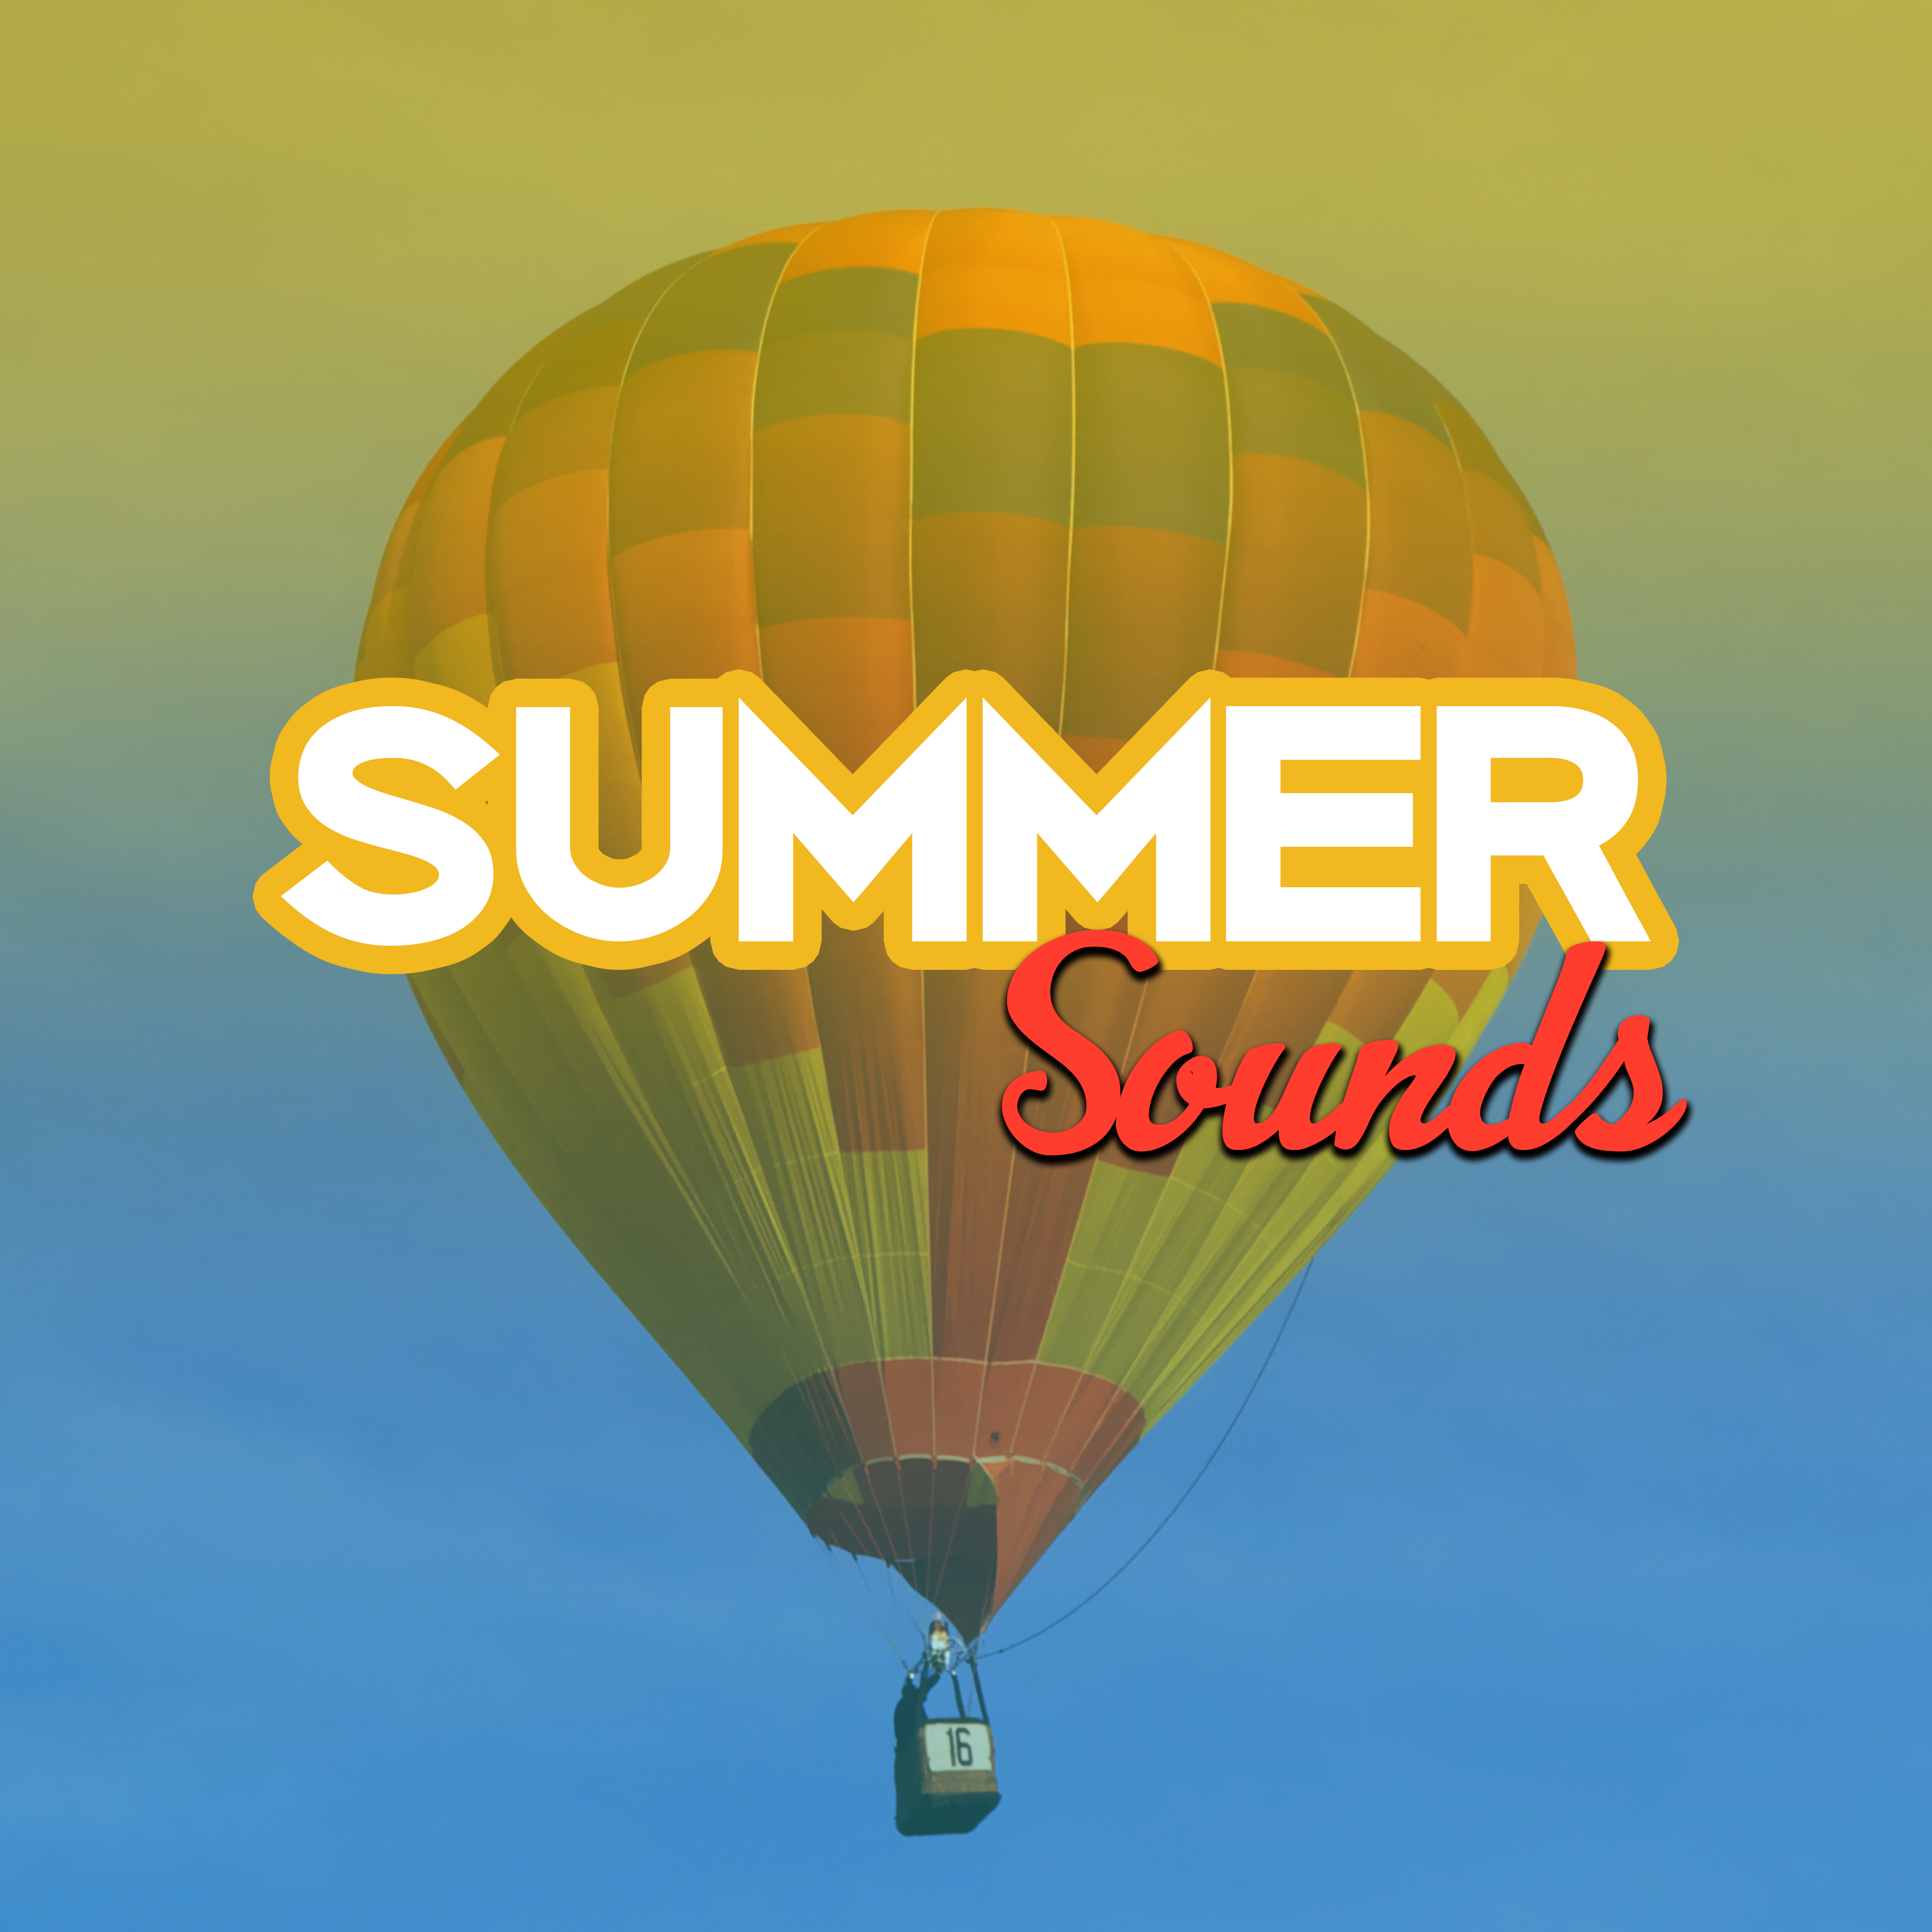 Summer Sounds  Best Chill Out, Pure Rest, Summer Chill, Beach Music, Stress Relief, Ibiza Lounge